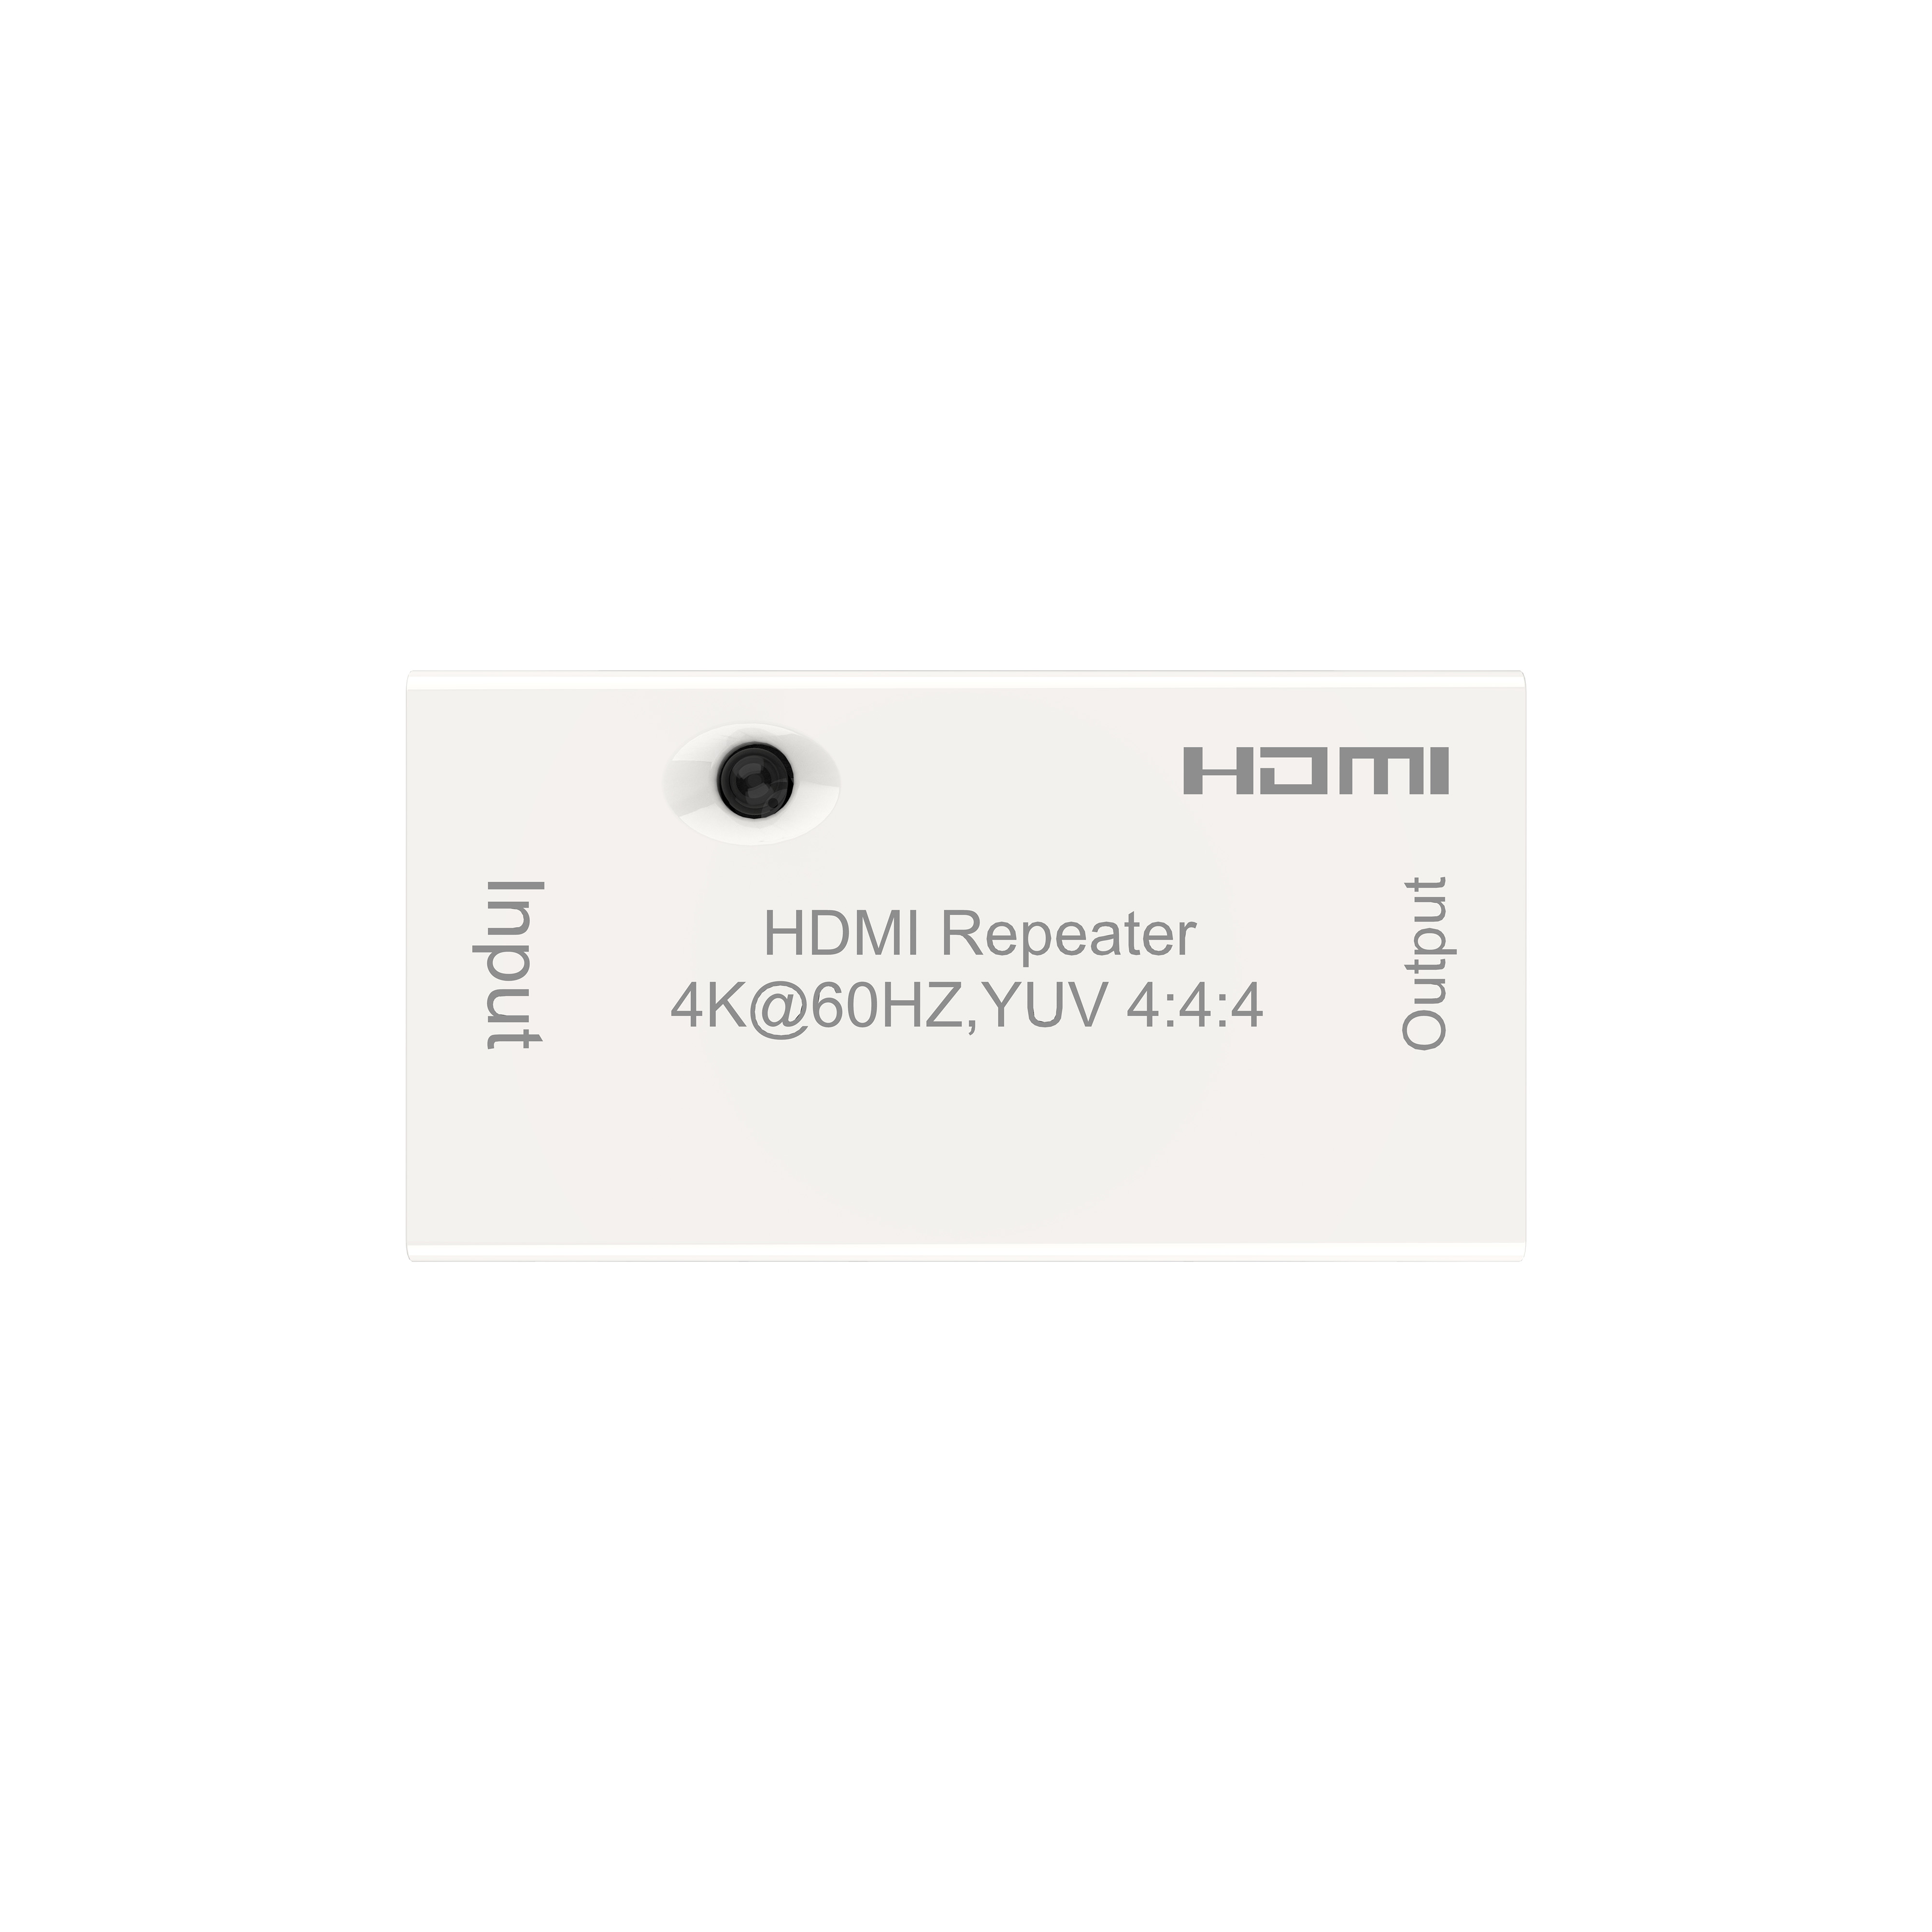  HDMI Repeater - Support 4K60HZ 4:4:4